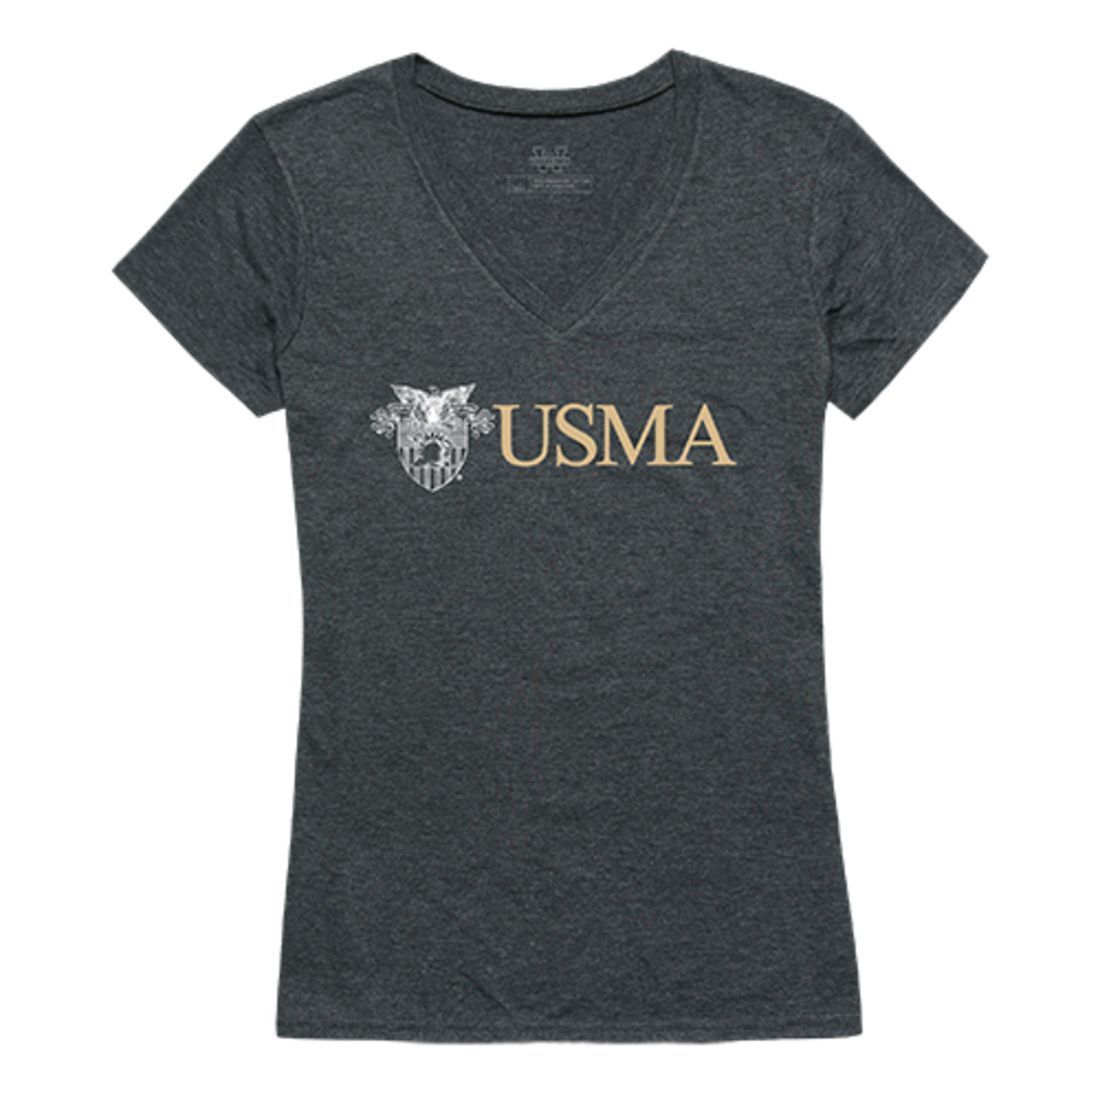 USMA United States Military Academy Army Black Nights Womens Institutional Tee T-Shirt Heather Charcoal-Campus-Wardrobe